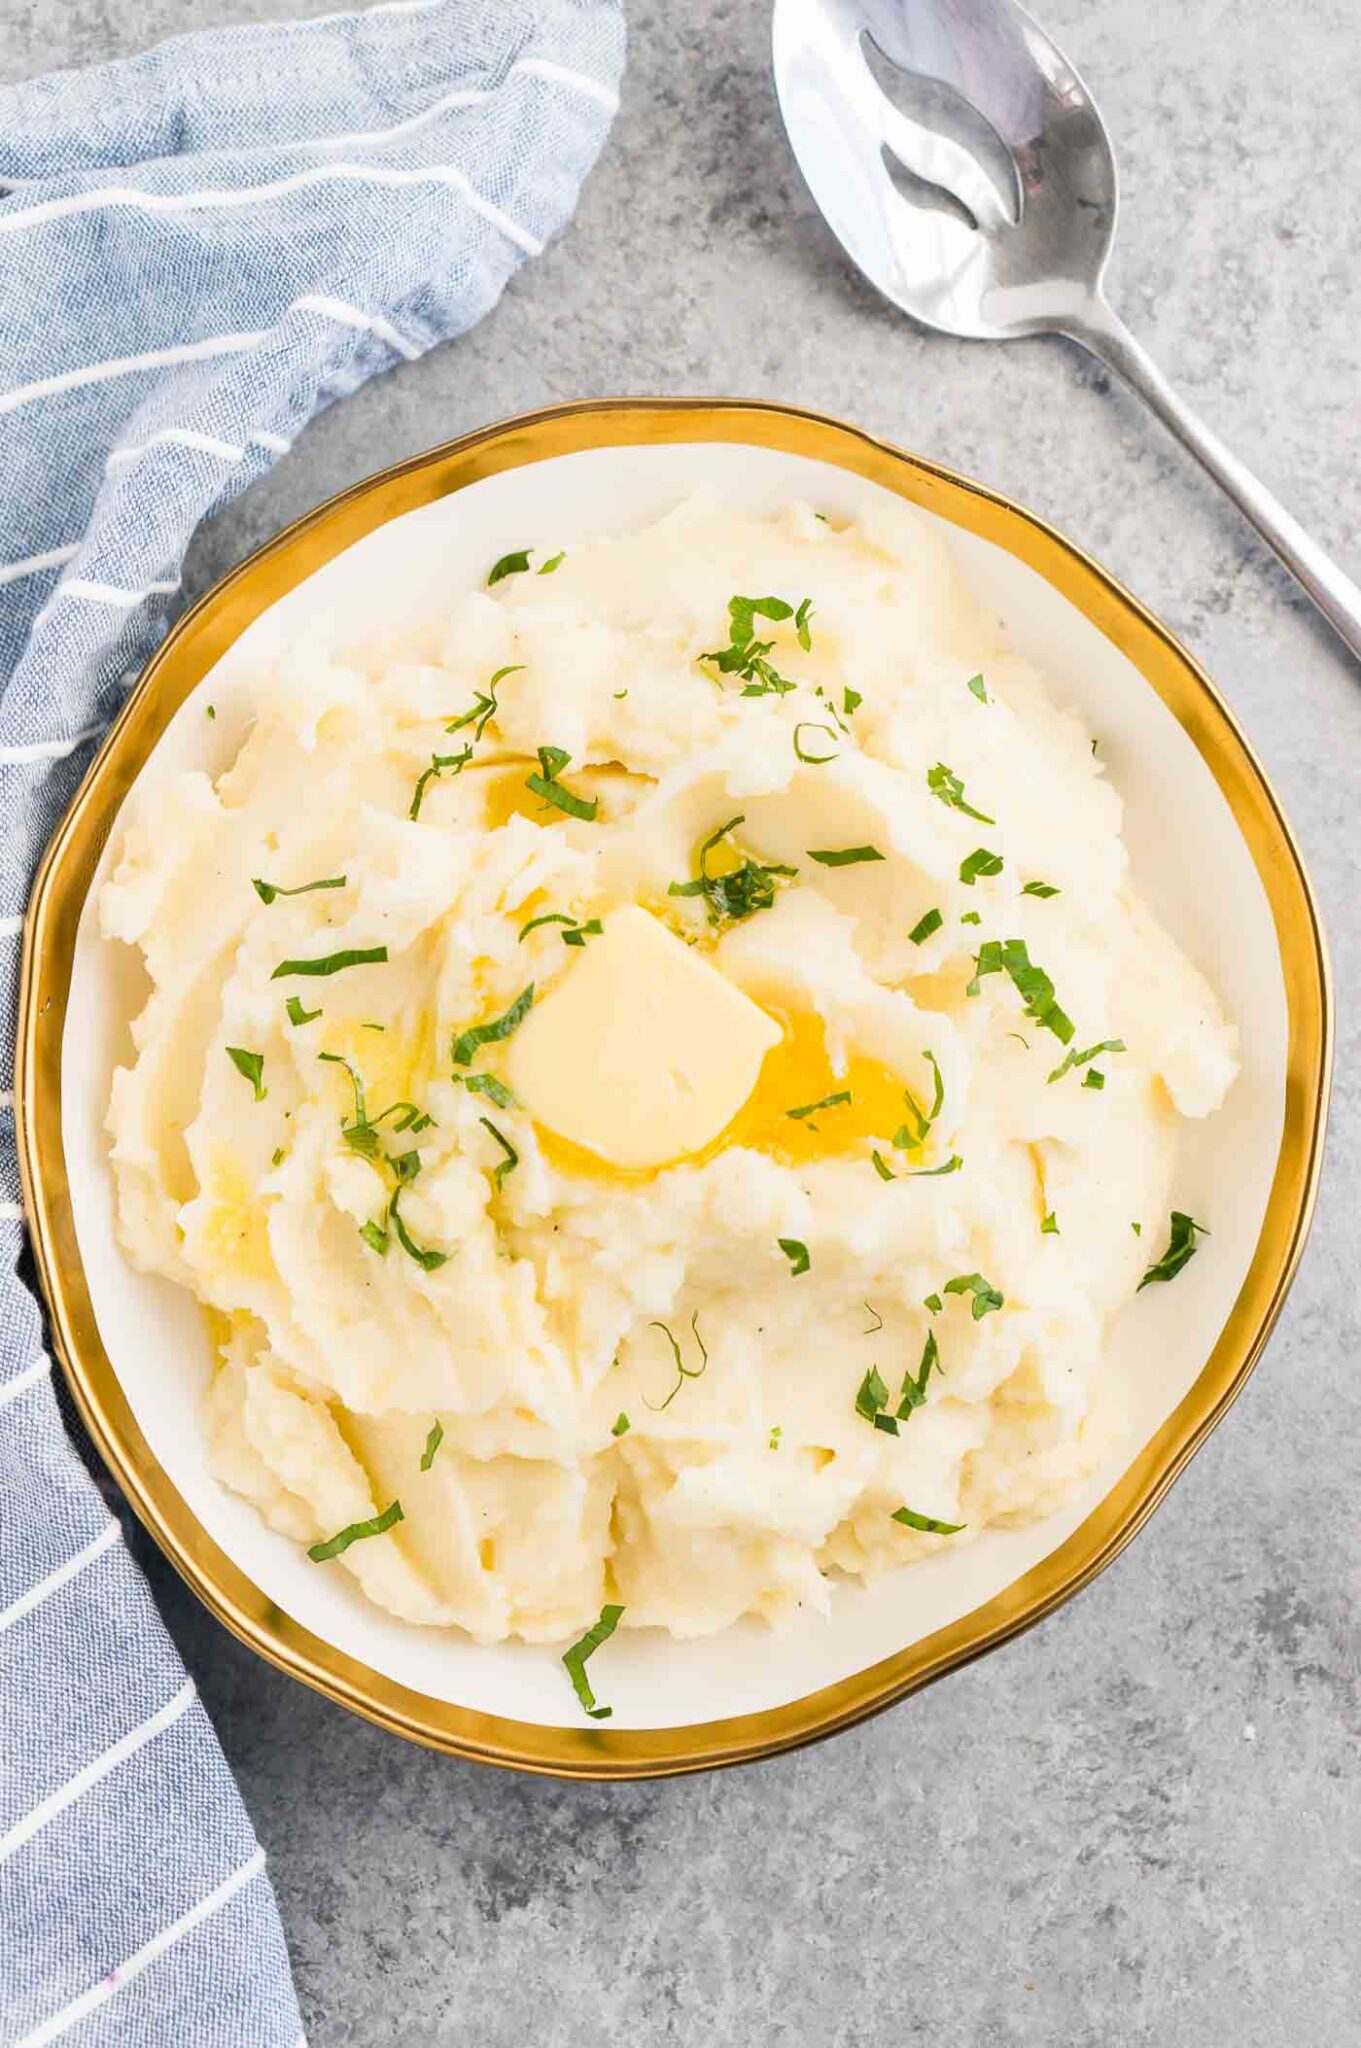 homemade mashed potatoes from scratch in a serving bowl